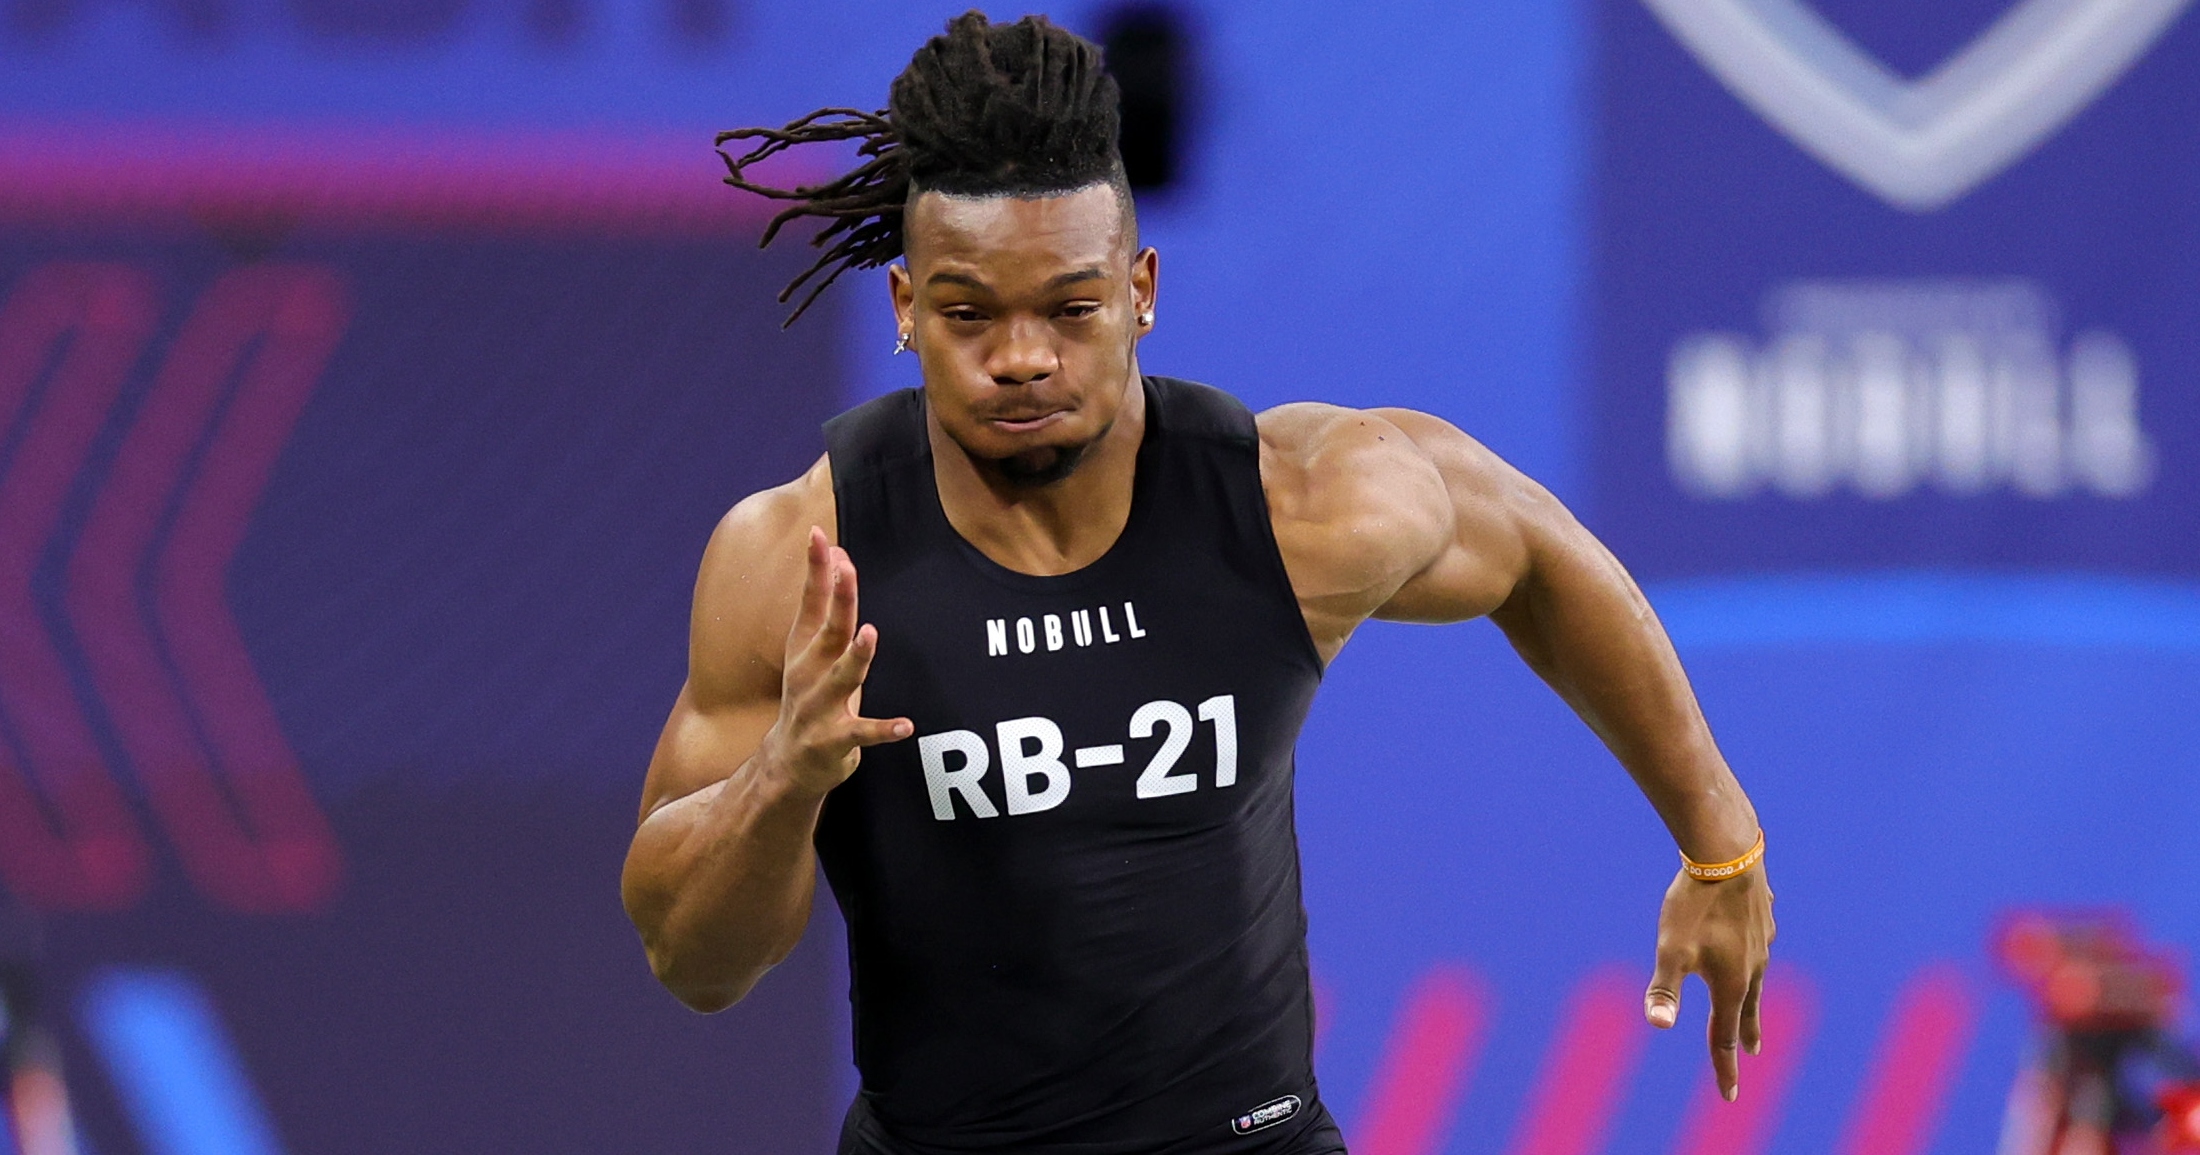 Fastest 40 times from running backs at the 2023 NFL Combine